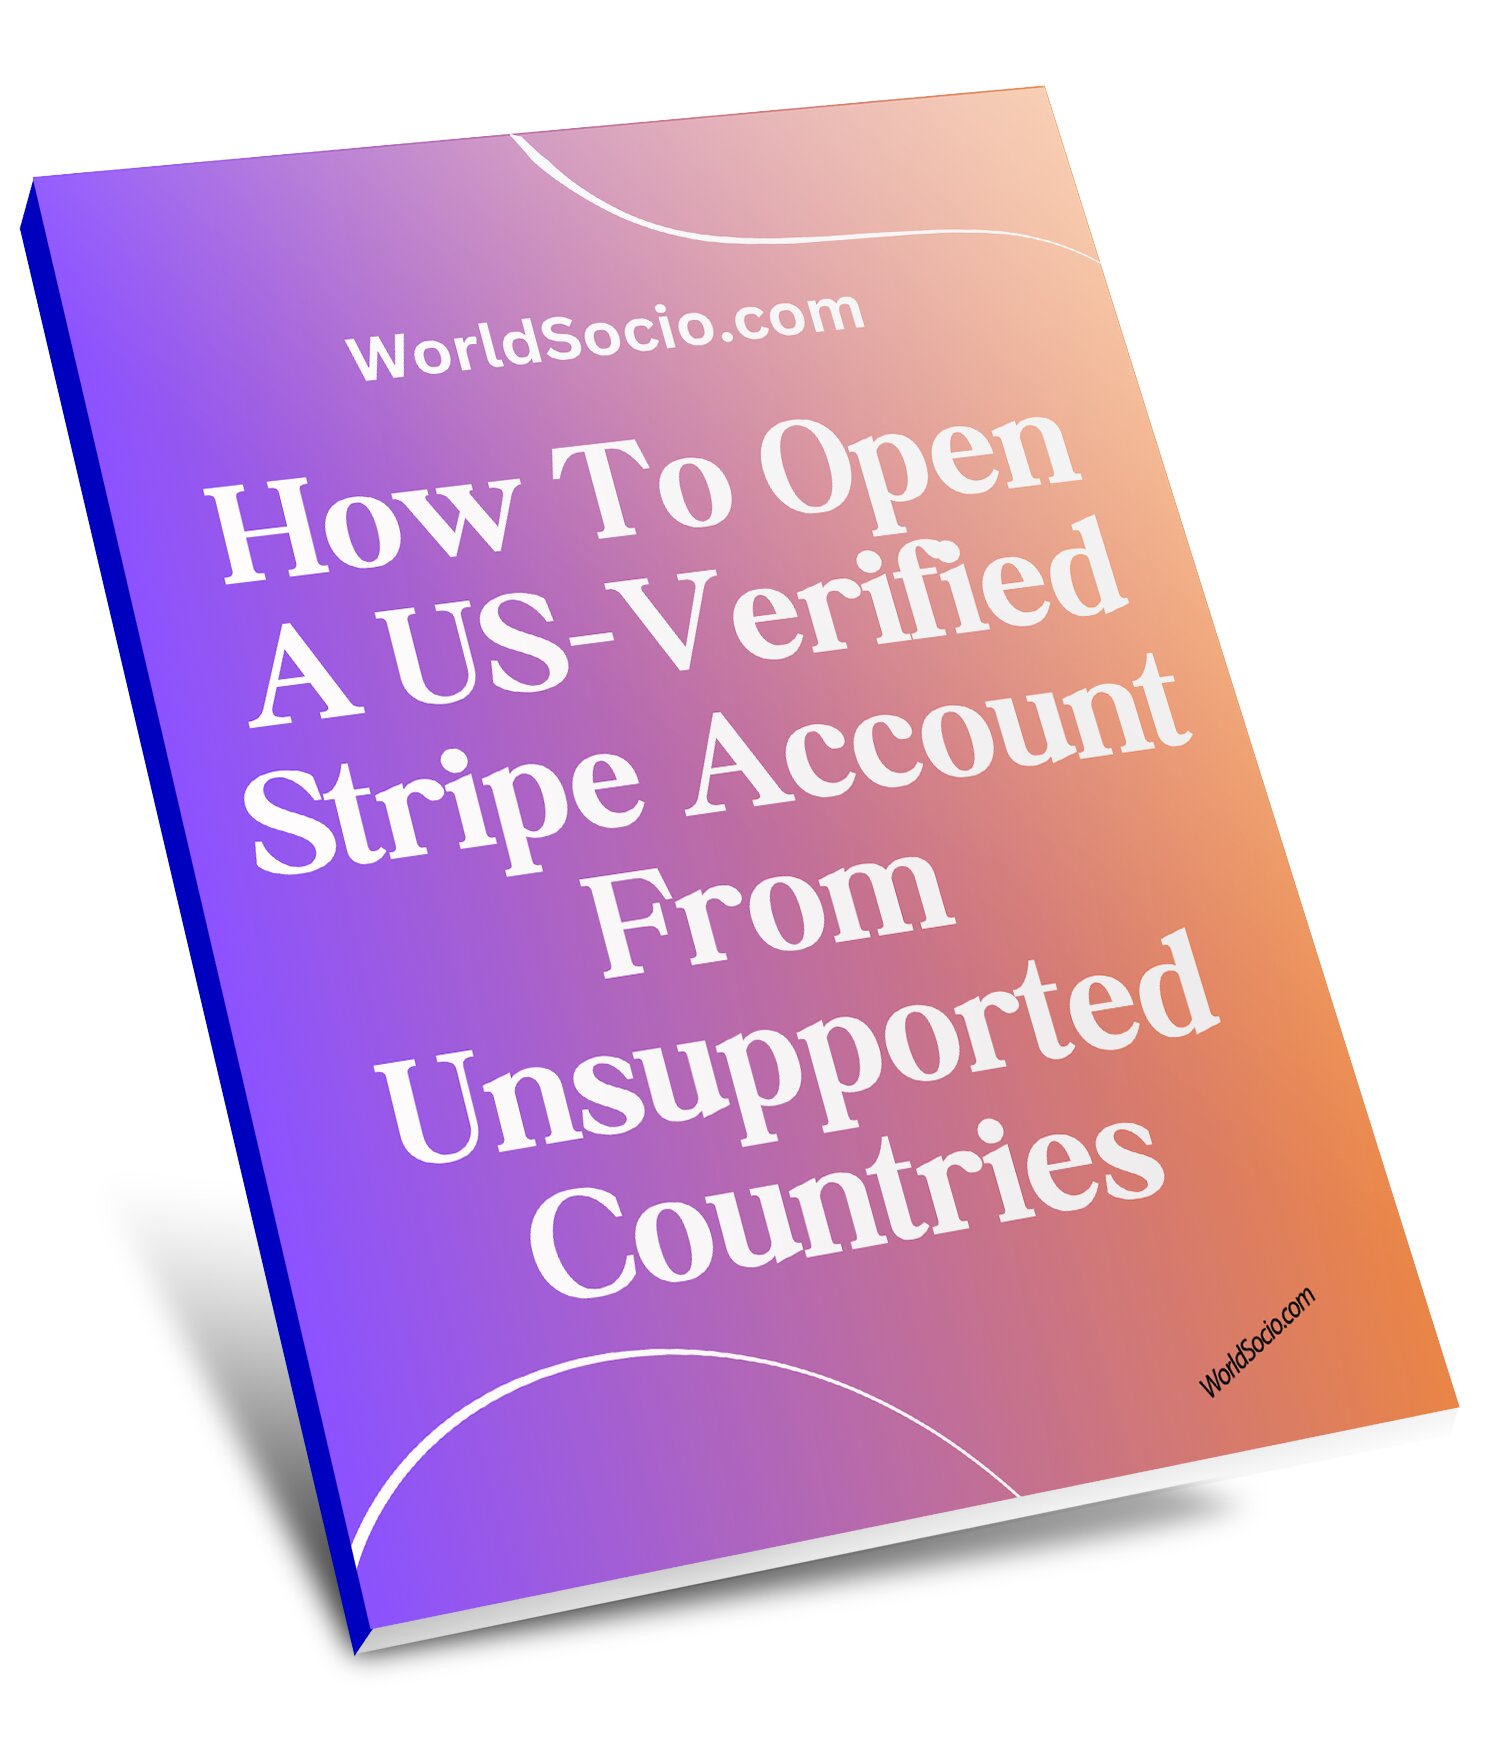 How To Open A US-Verified Stripe Account From Unsupported Countries.jpg